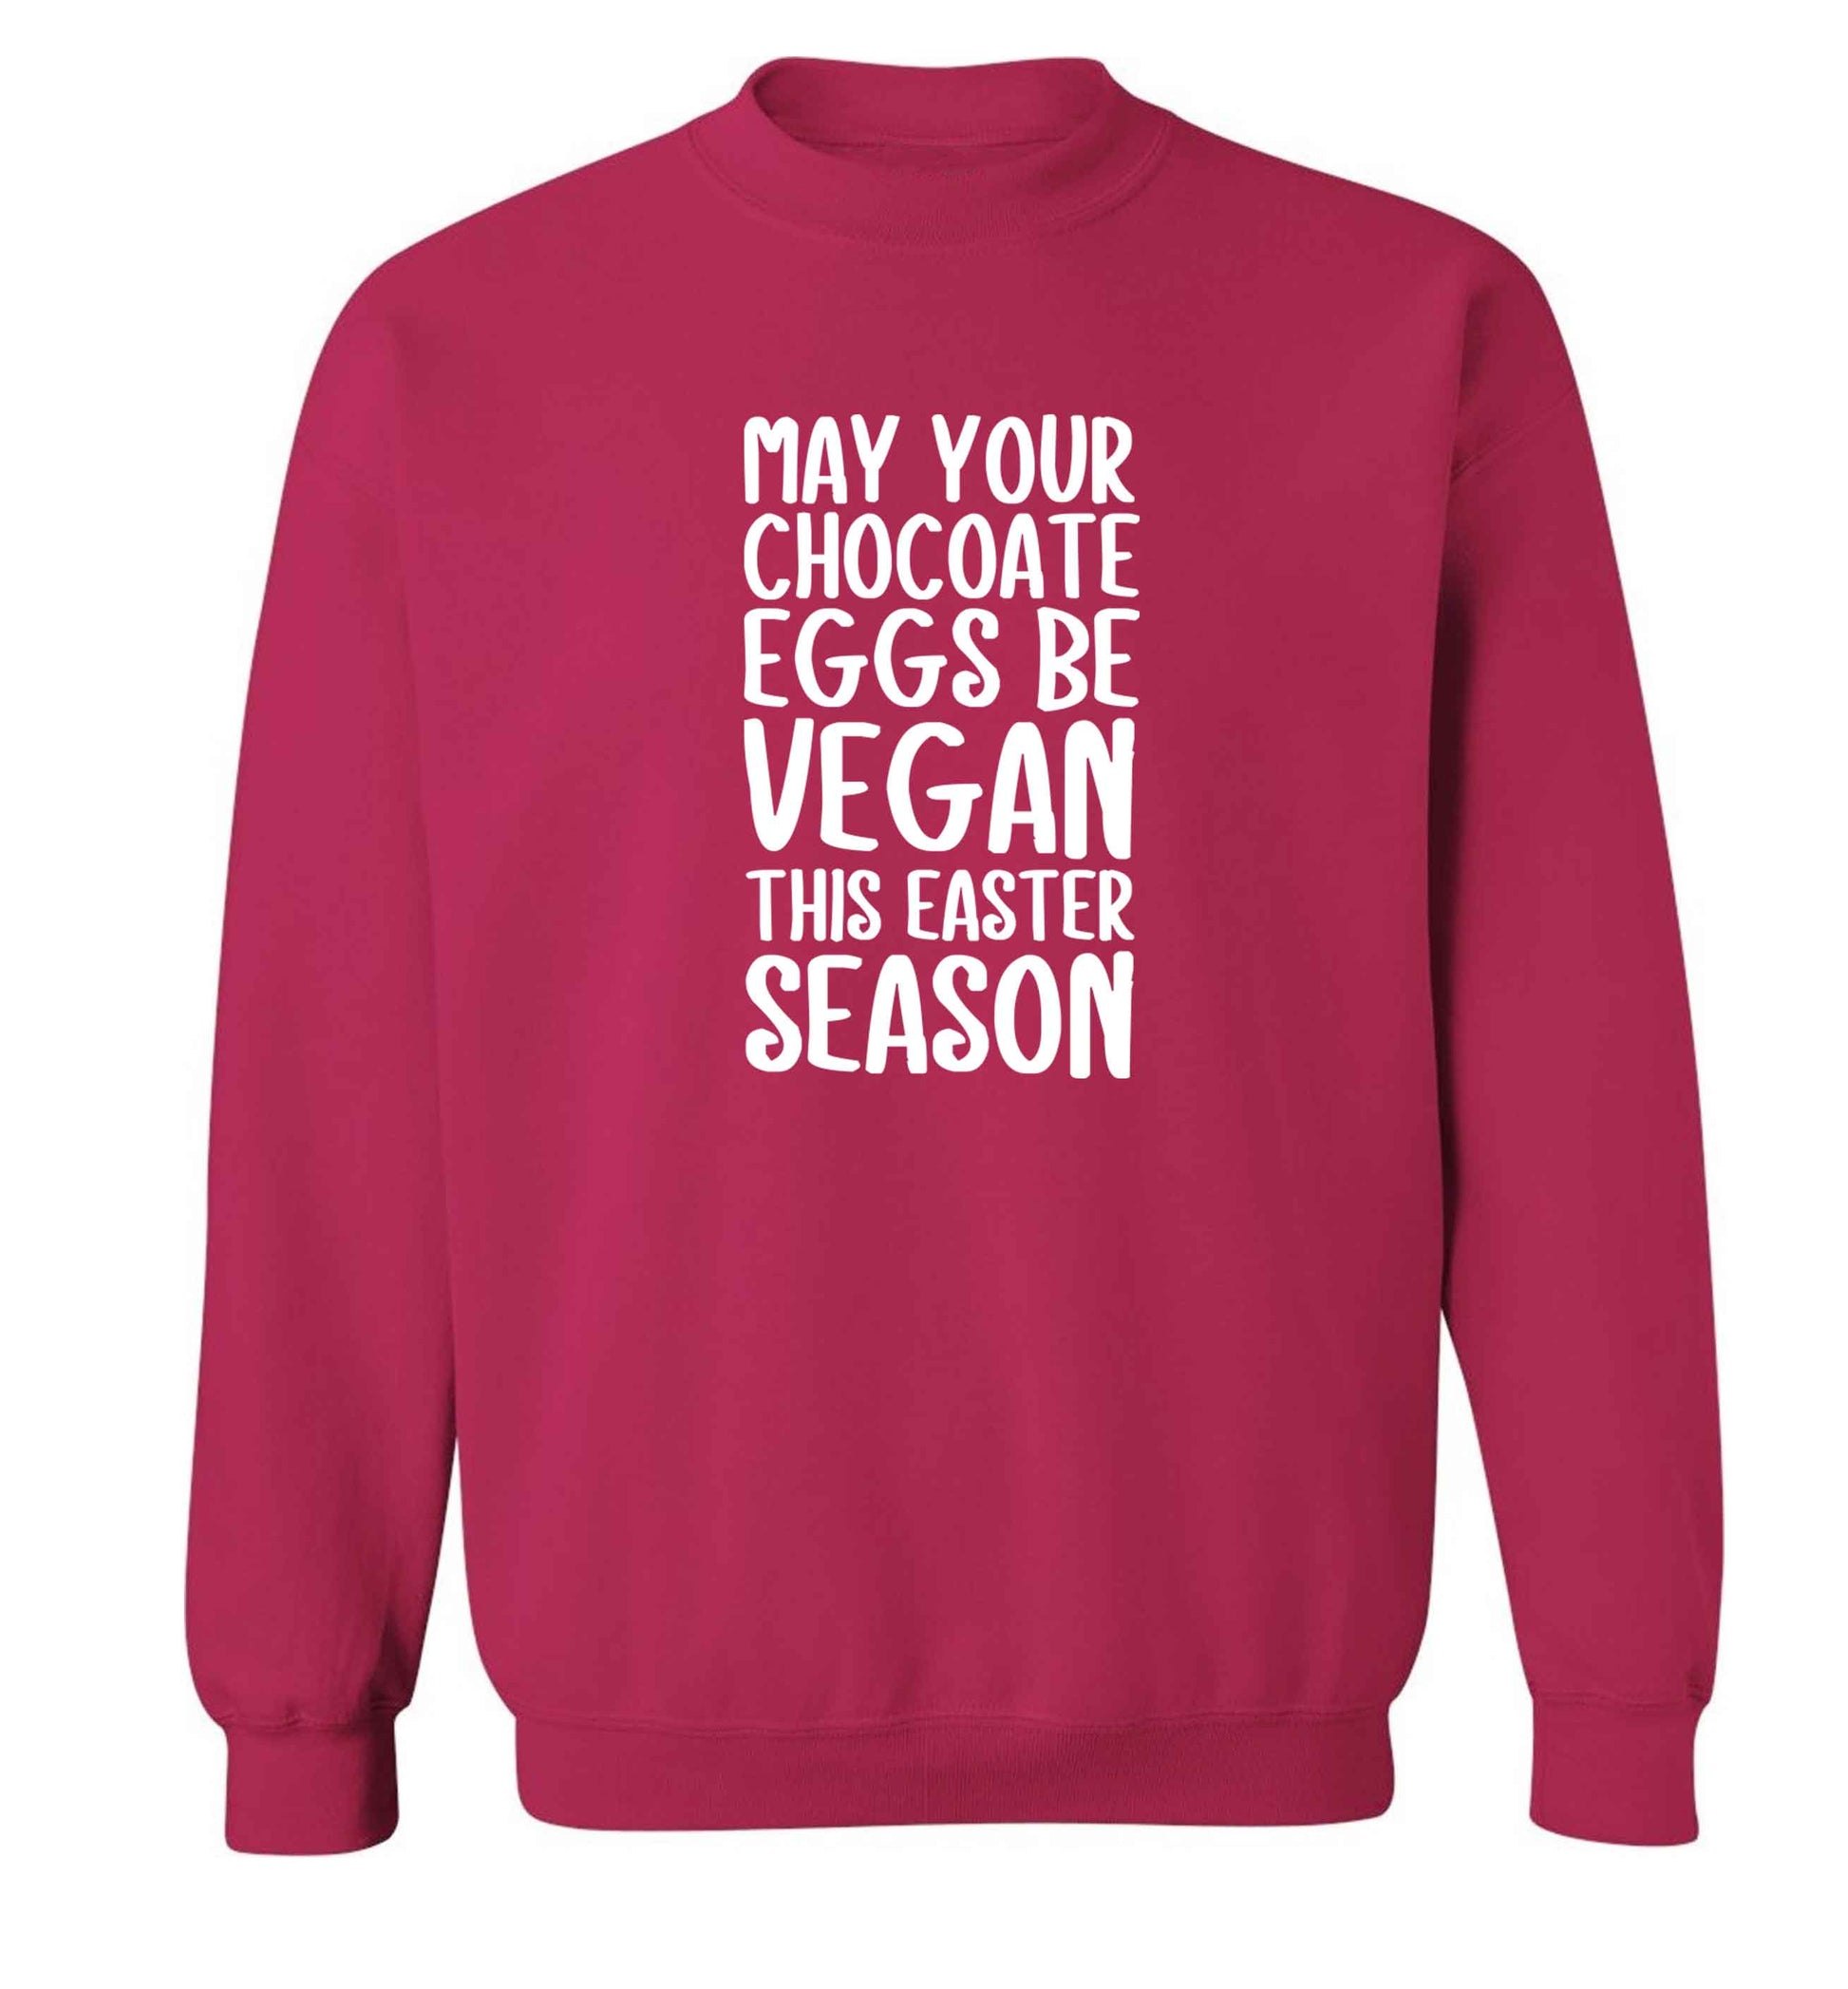 Easter bunny approved! Vegans will love this easter themed adult's unisex pink sweater 2XL